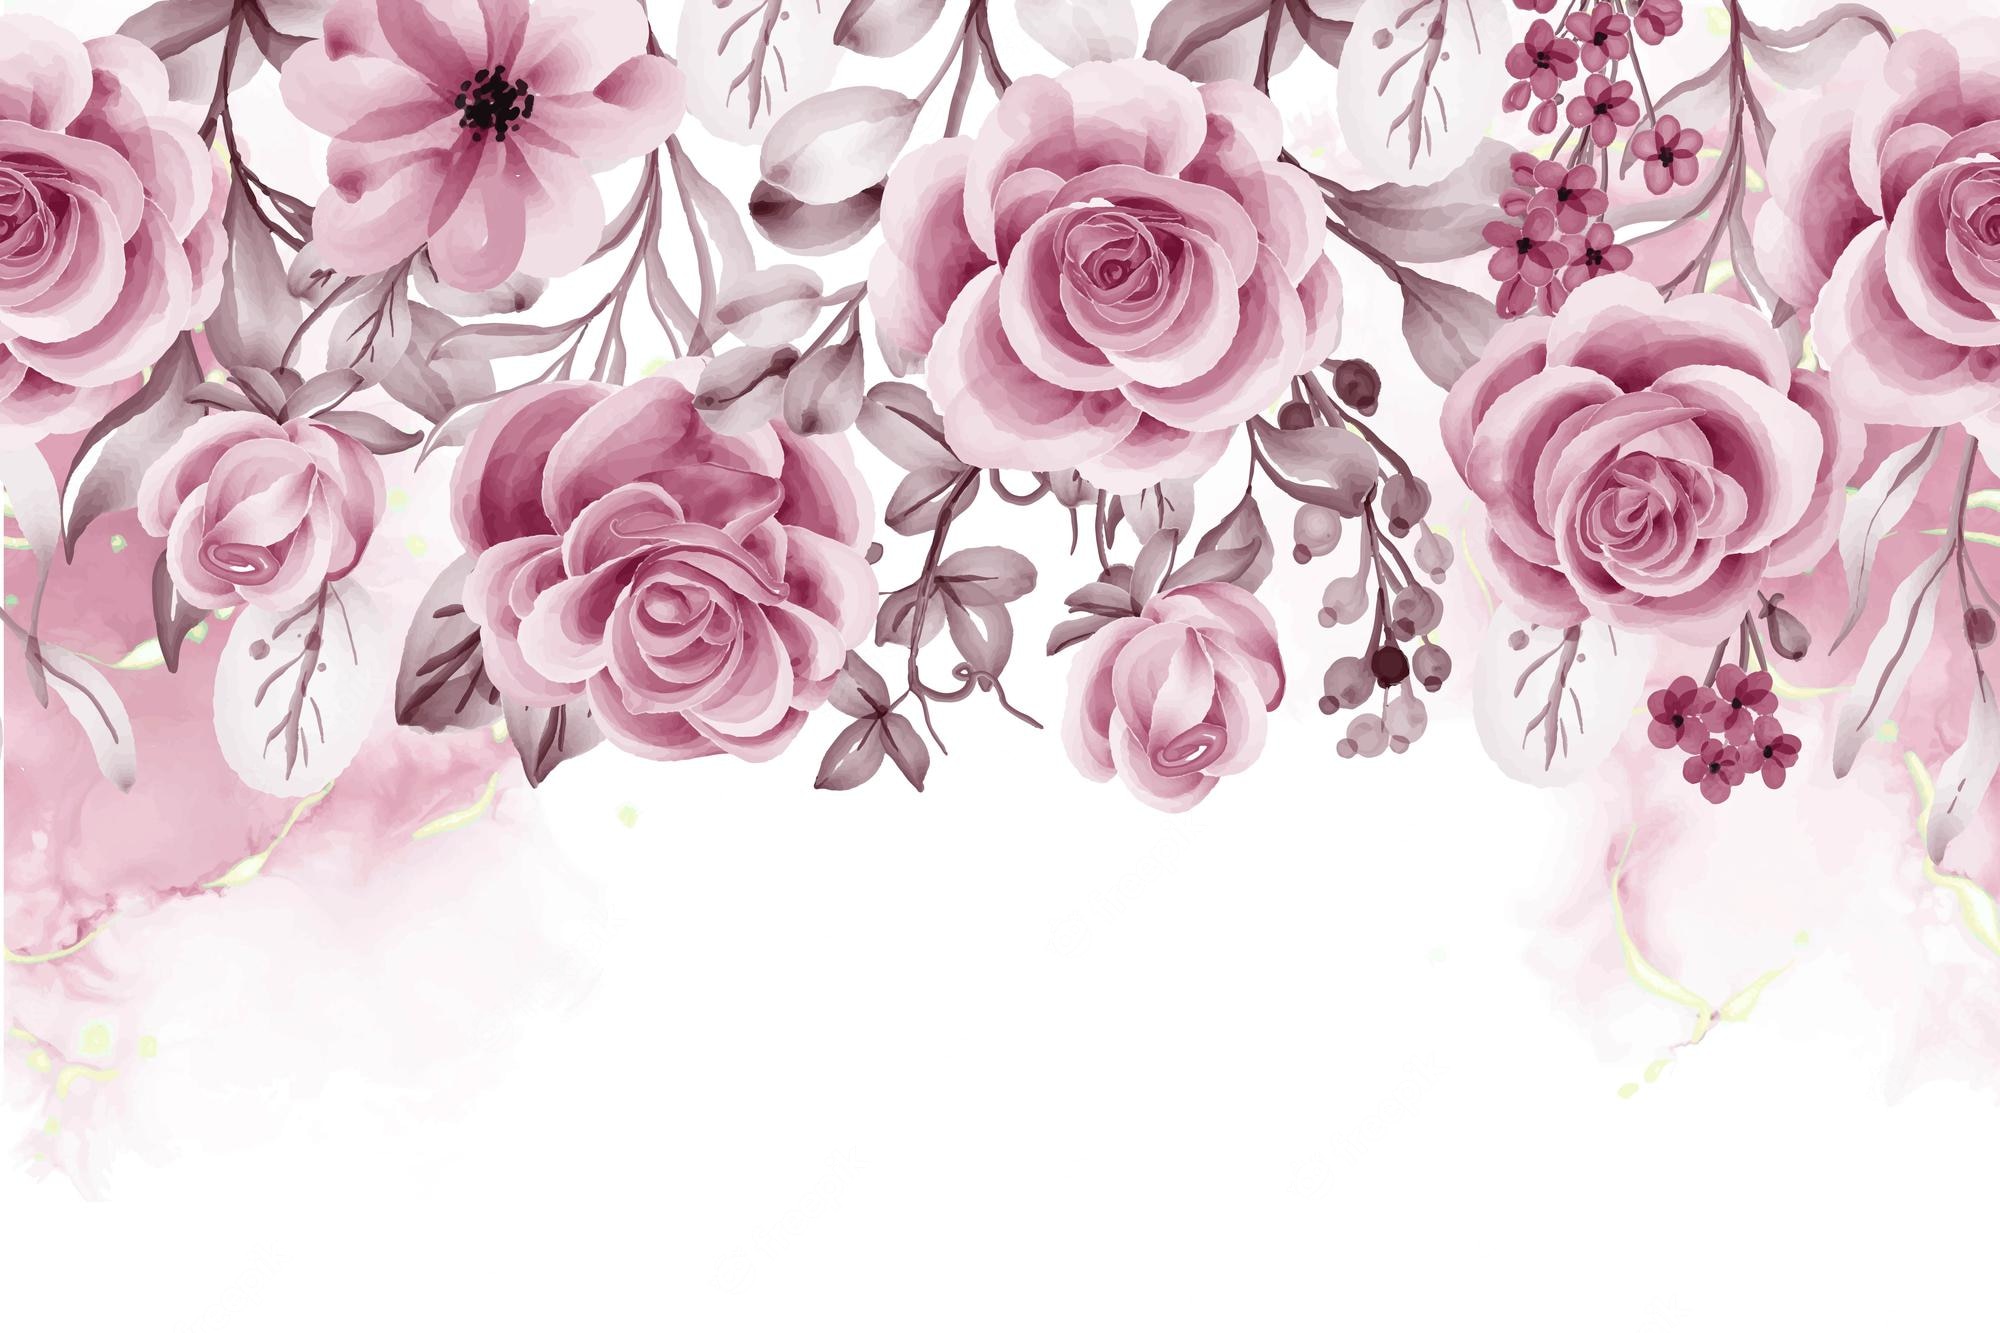 Rose Gold Floral Wallpapers